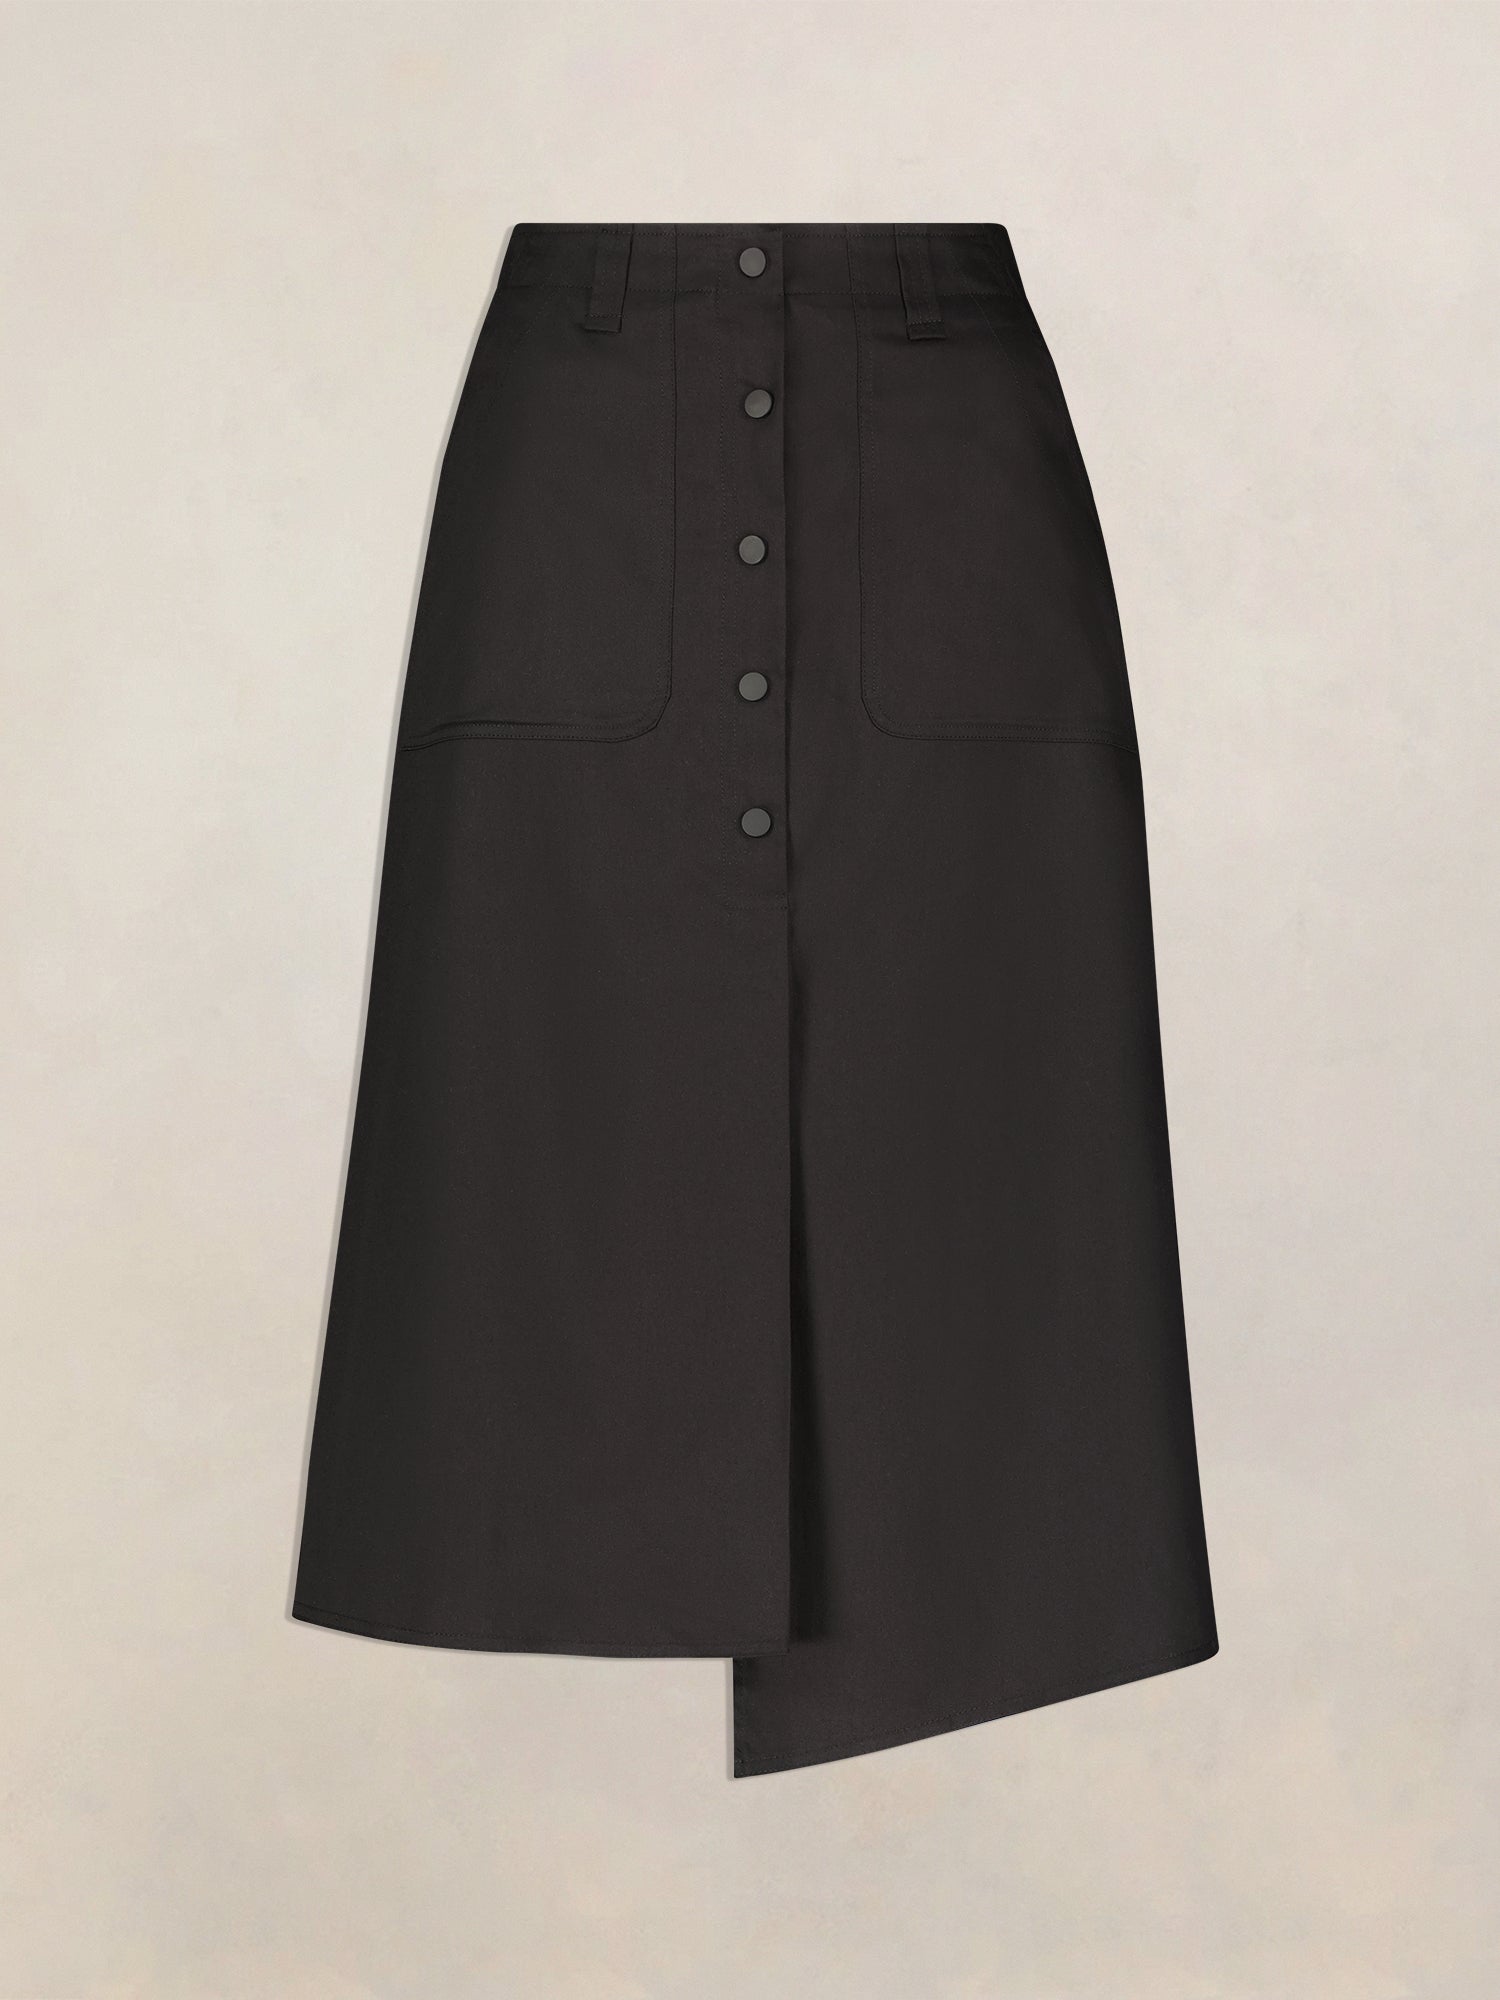 Pink Orchid Ava A-Line Twill Black Skirt